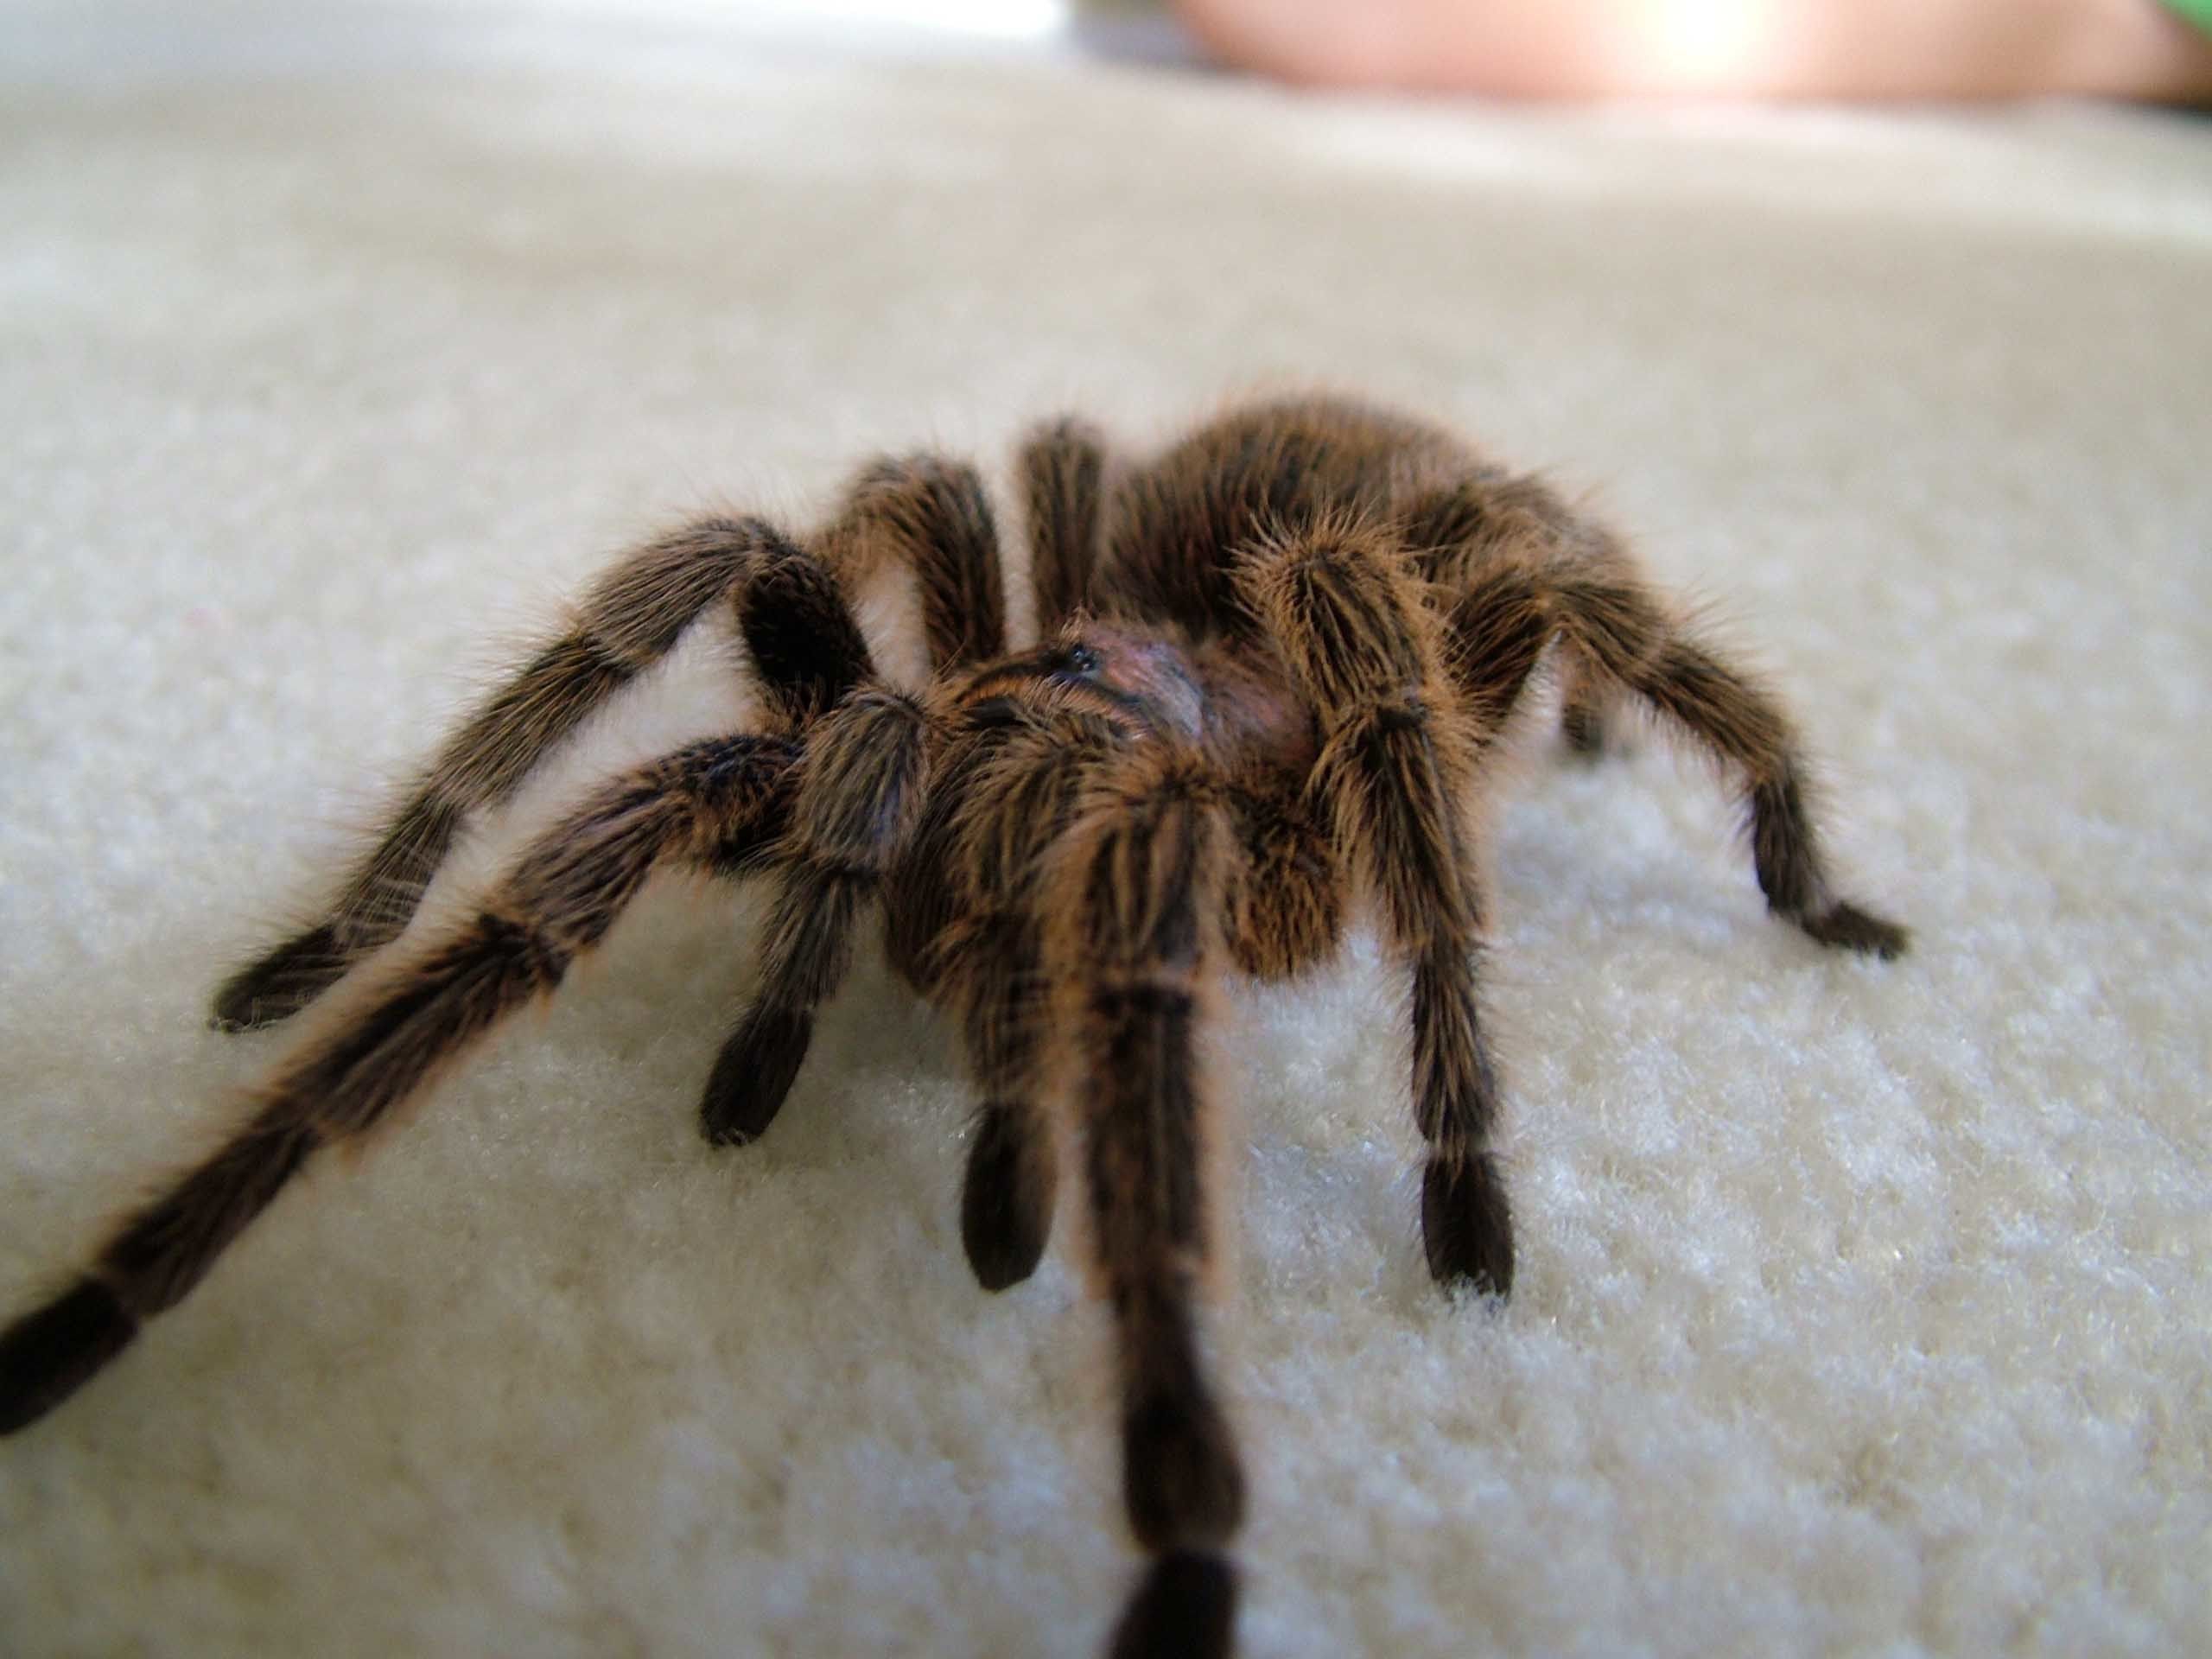 Scary Spider Moving HD Wallpaper Daily Background Eyes Does A Tarantula Have